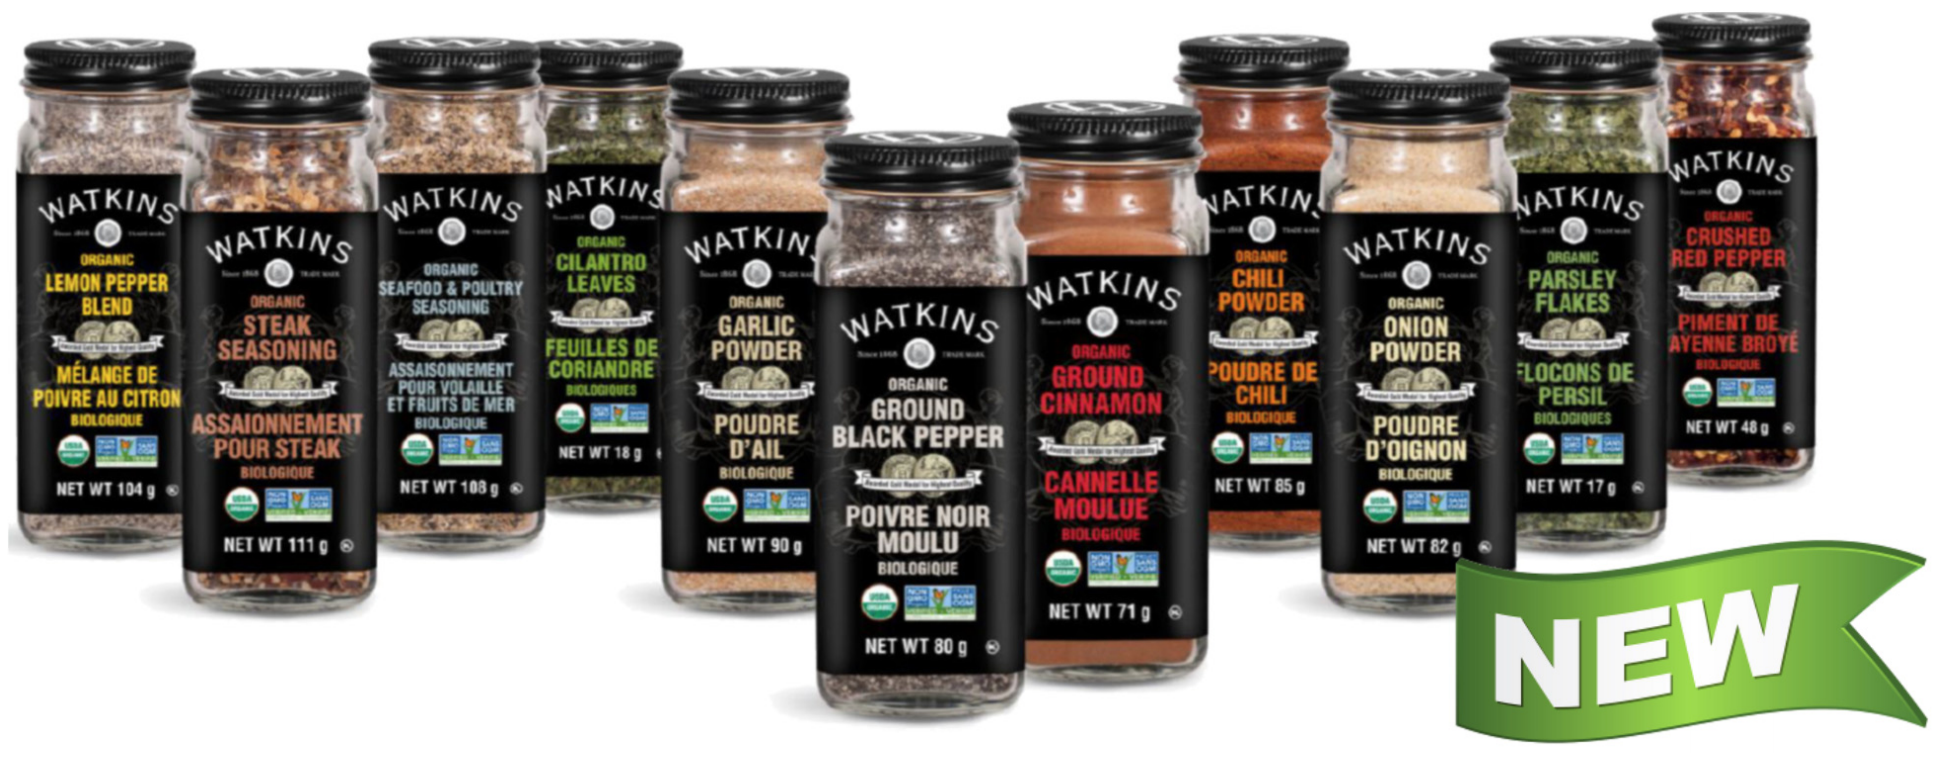 Where to Buy Watkins Products and Spices in Canada